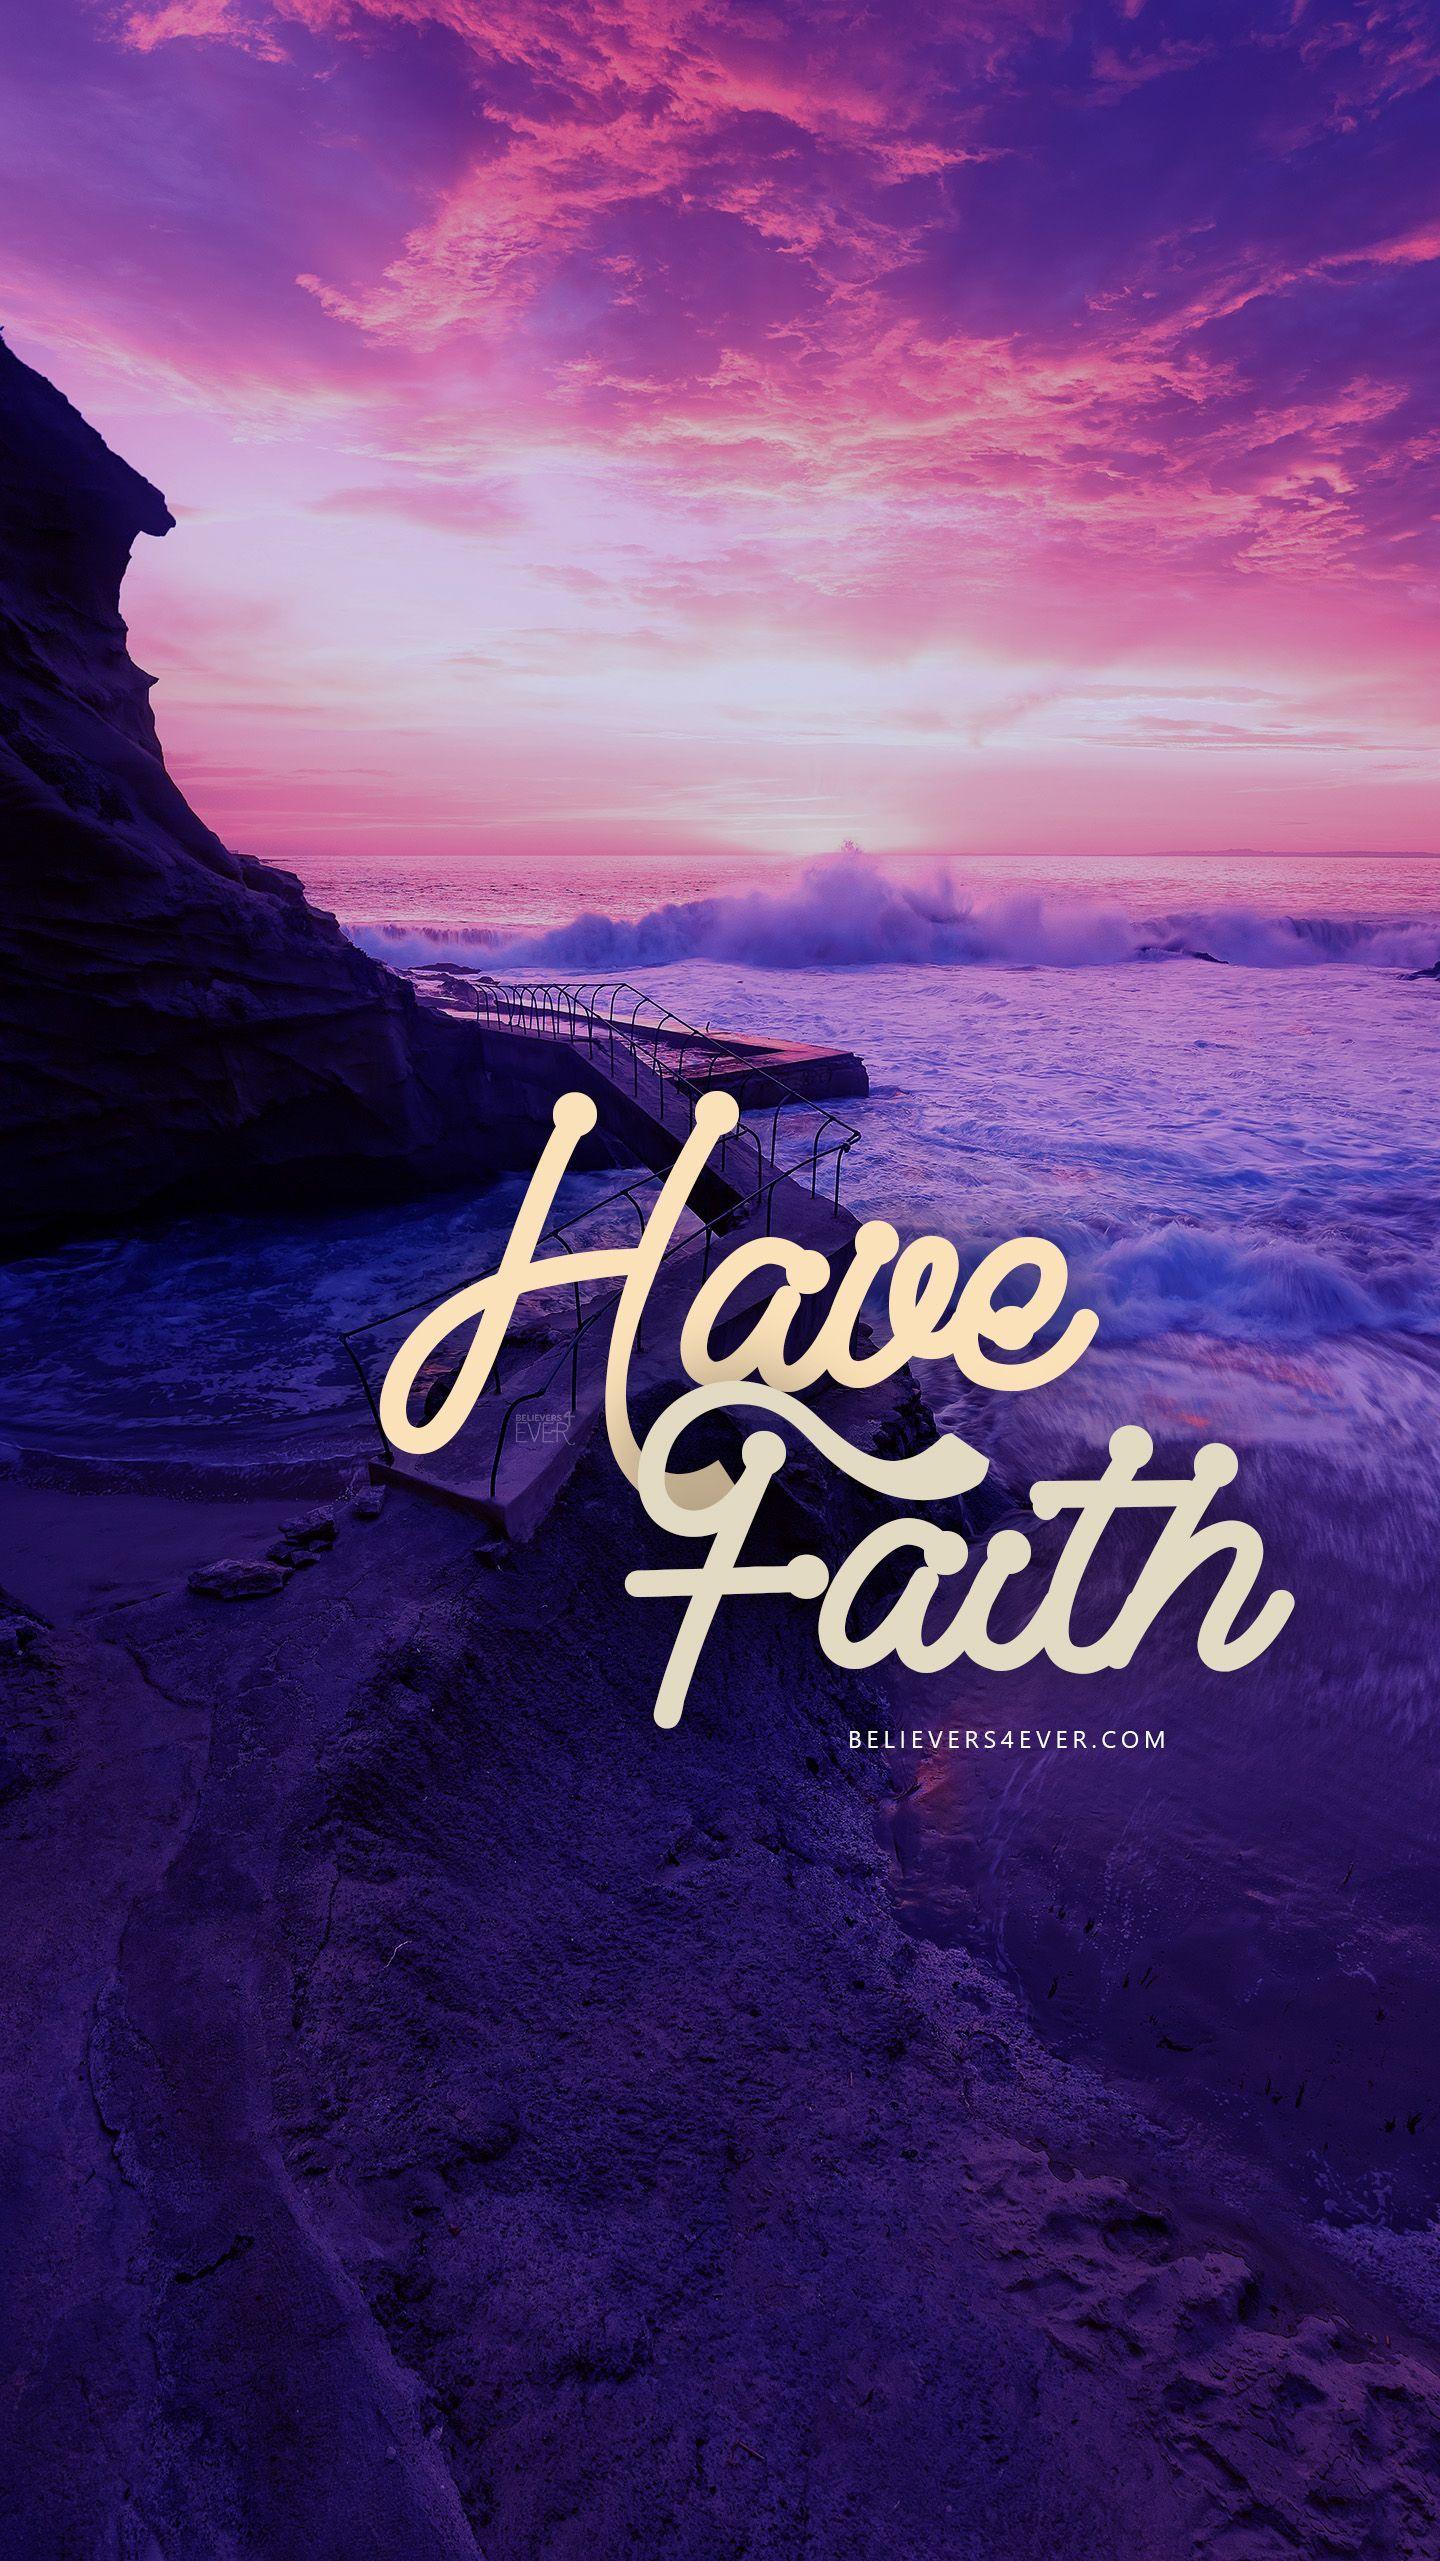 Wednesday Wallpaper: Your Faith is Futile - Jacob Abshire